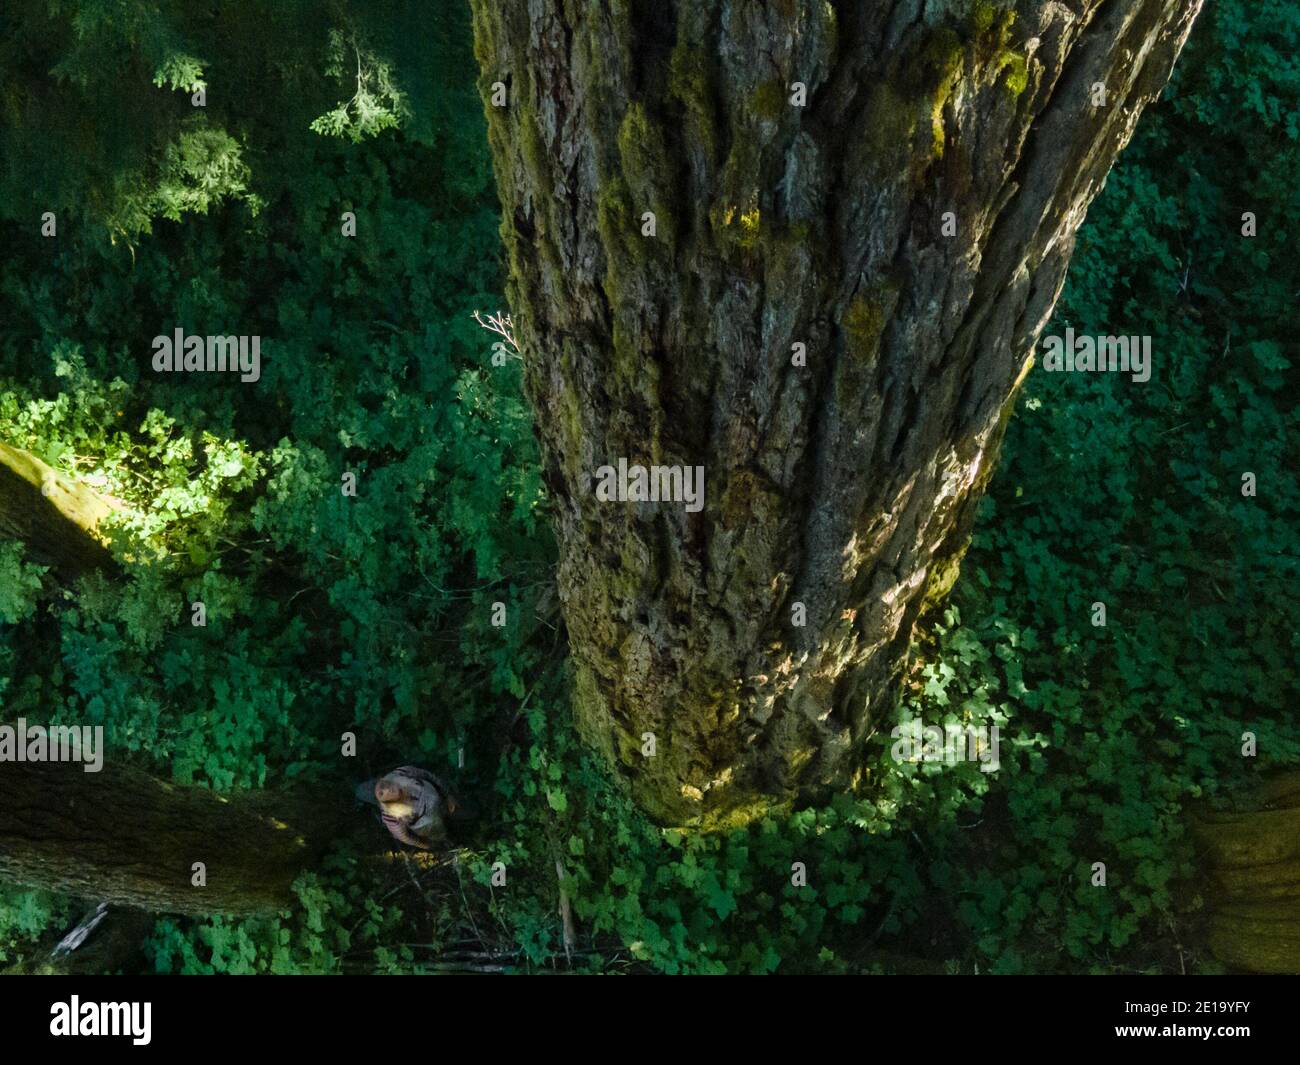 Bird eye view of an adult standing by an old growth Douglas in the Canadian Rainforest. Stock Photo